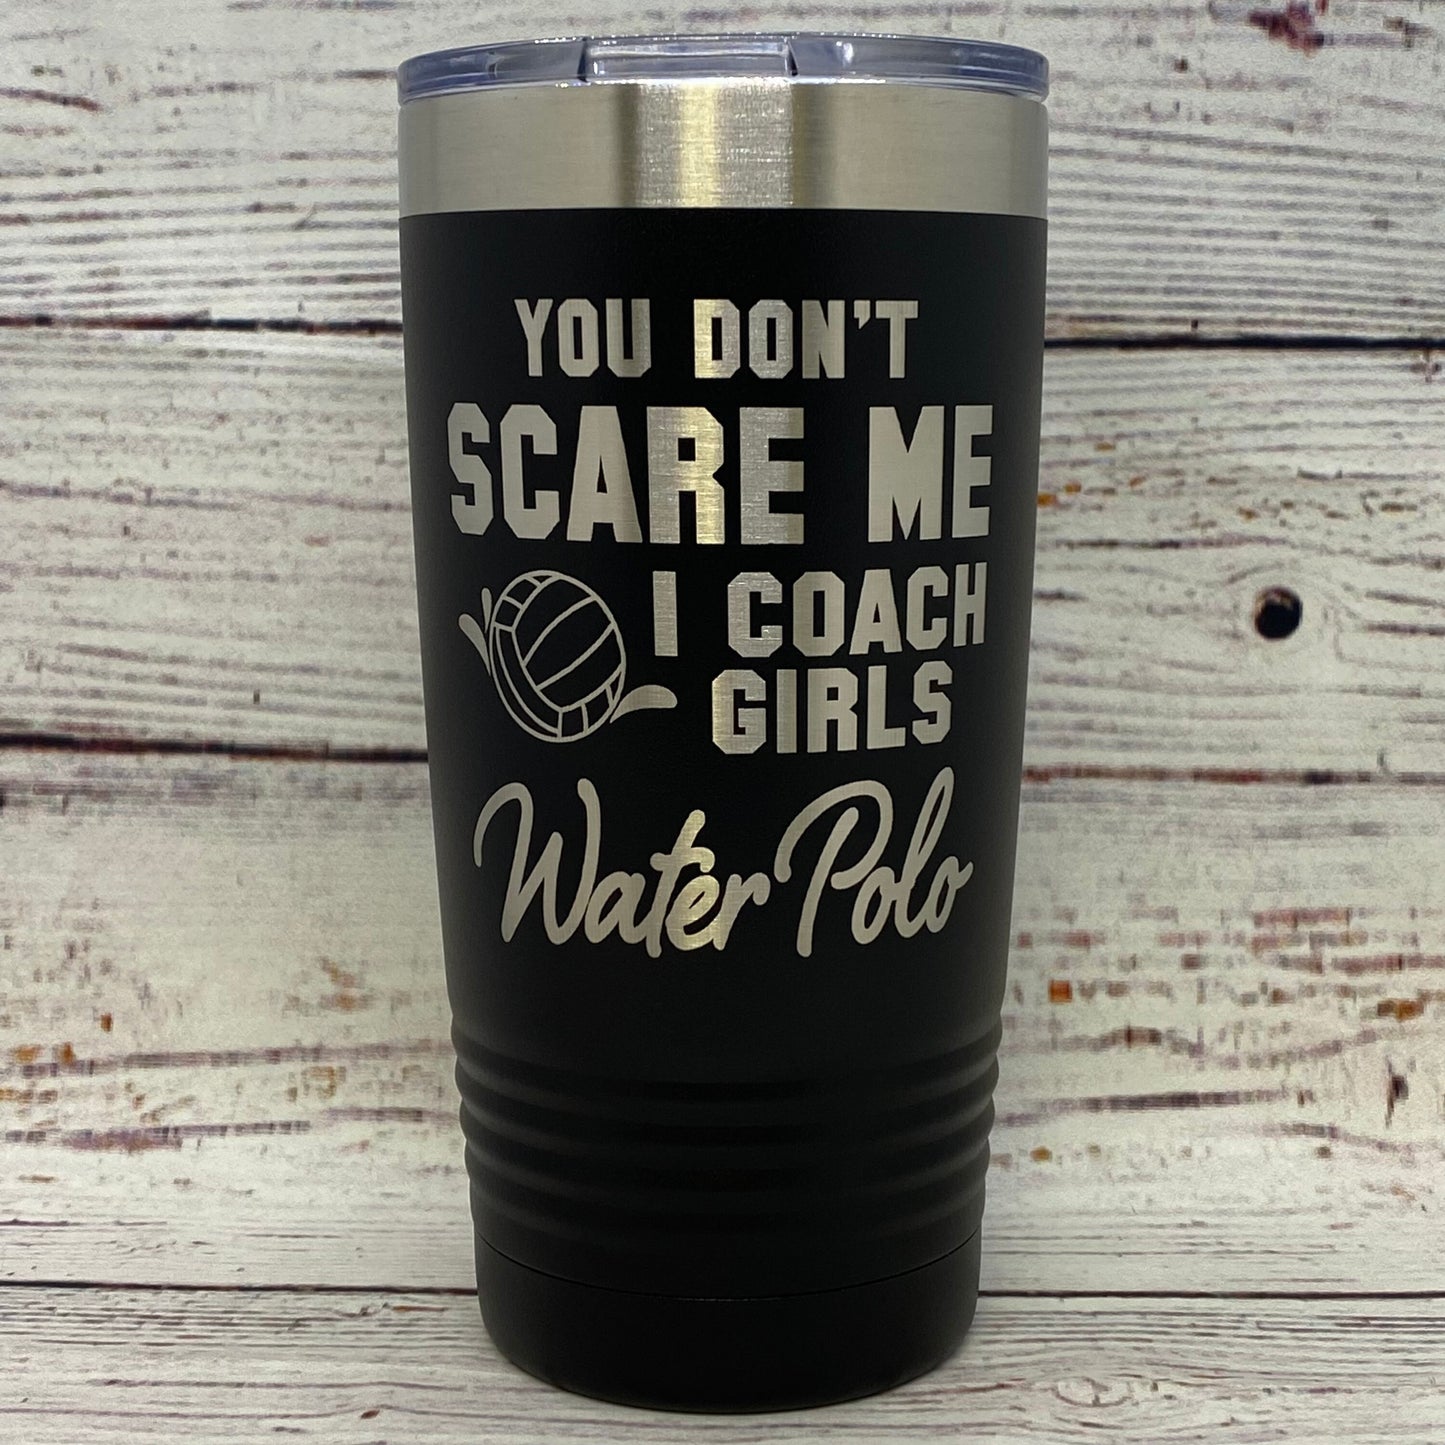 You Don't Scare Me I Coach Girls Water Polo 20oz. Stainless Steel Tumbler